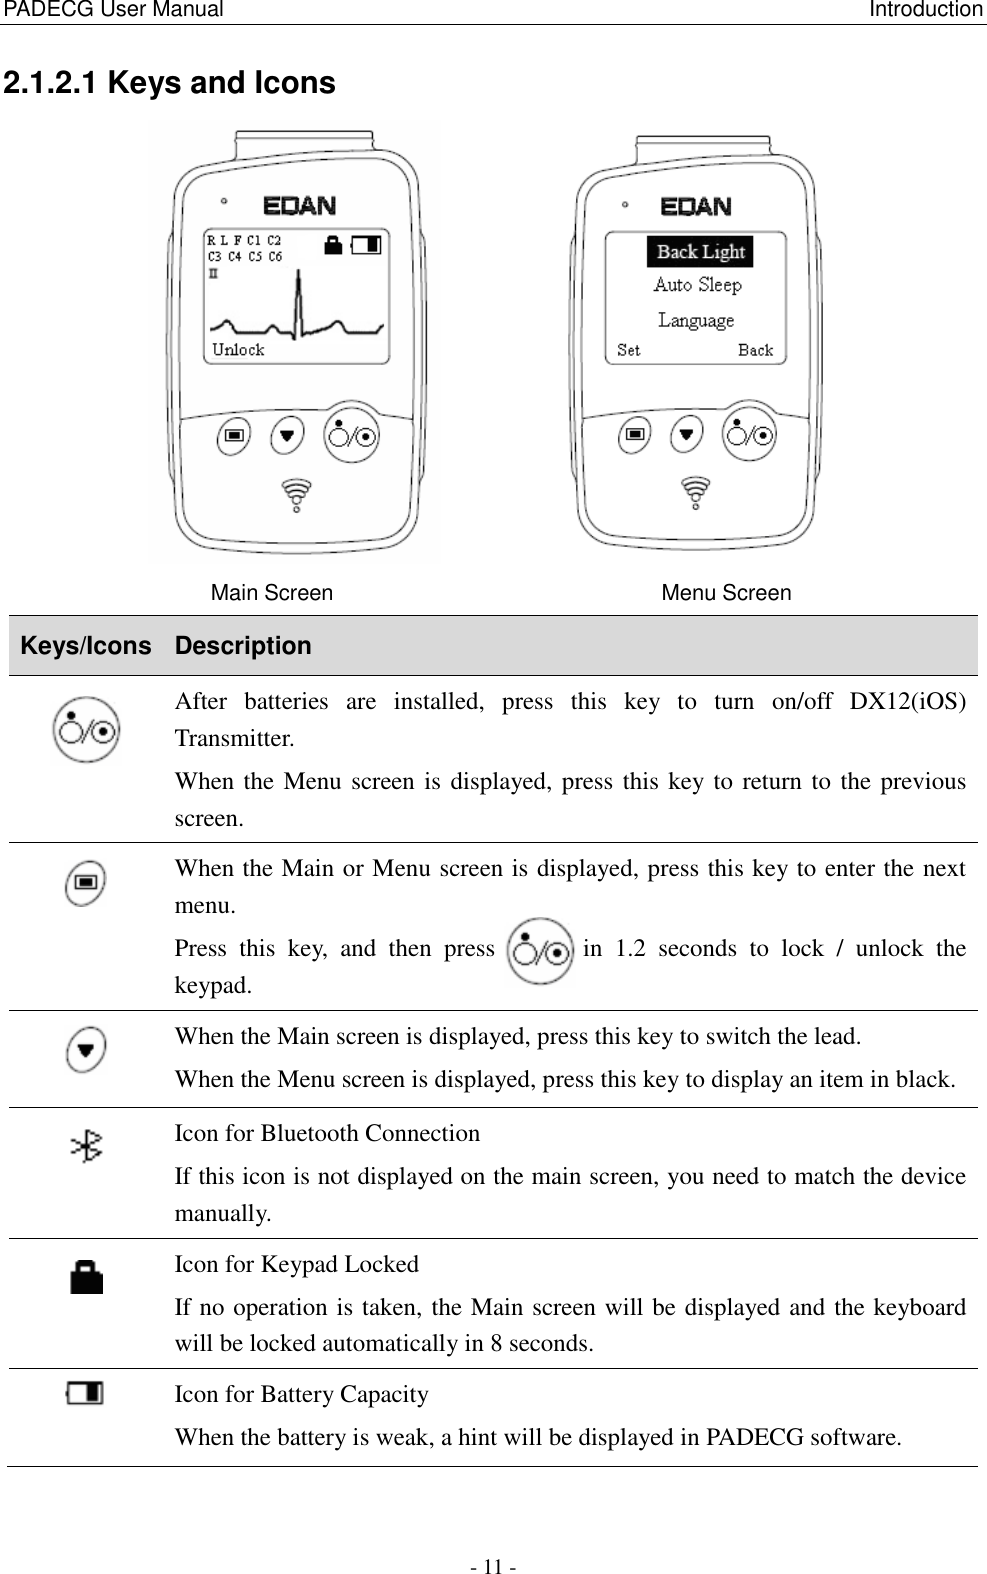 PADECG User Manual                                                                                                                      Introduction - 11 - 2.1.2.1 Keys and Icons            Main Screen                                                            Menu Screen Keys/Icons Description  After  batteries  are  installed,  press  this  key  to  turn  on/off  DX12(iOS) Transmitter. When the Menu screen is displayed, press this key to return to the previous screen.    When the Main or Menu screen is displayed, press this key to enter the next menu. Press  this  key,  and  then  press              in  1.2  seconds  to  lock  /  unlock  the keypad.  When the Main screen is displayed, press this key to switch the lead. When the Menu screen is displayed, press this key to display an item in black.  Icon for Bluetooth Connection If this icon is not displayed on the main screen, you need to match the device manually.  Icon for Keypad Locked If no operation is taken, the Main screen will be displayed and the keyboard will be locked automatically in 8 seconds.  Icon for Battery Capacity When the battery is weak, a hint will be displayed in PADECG software.   